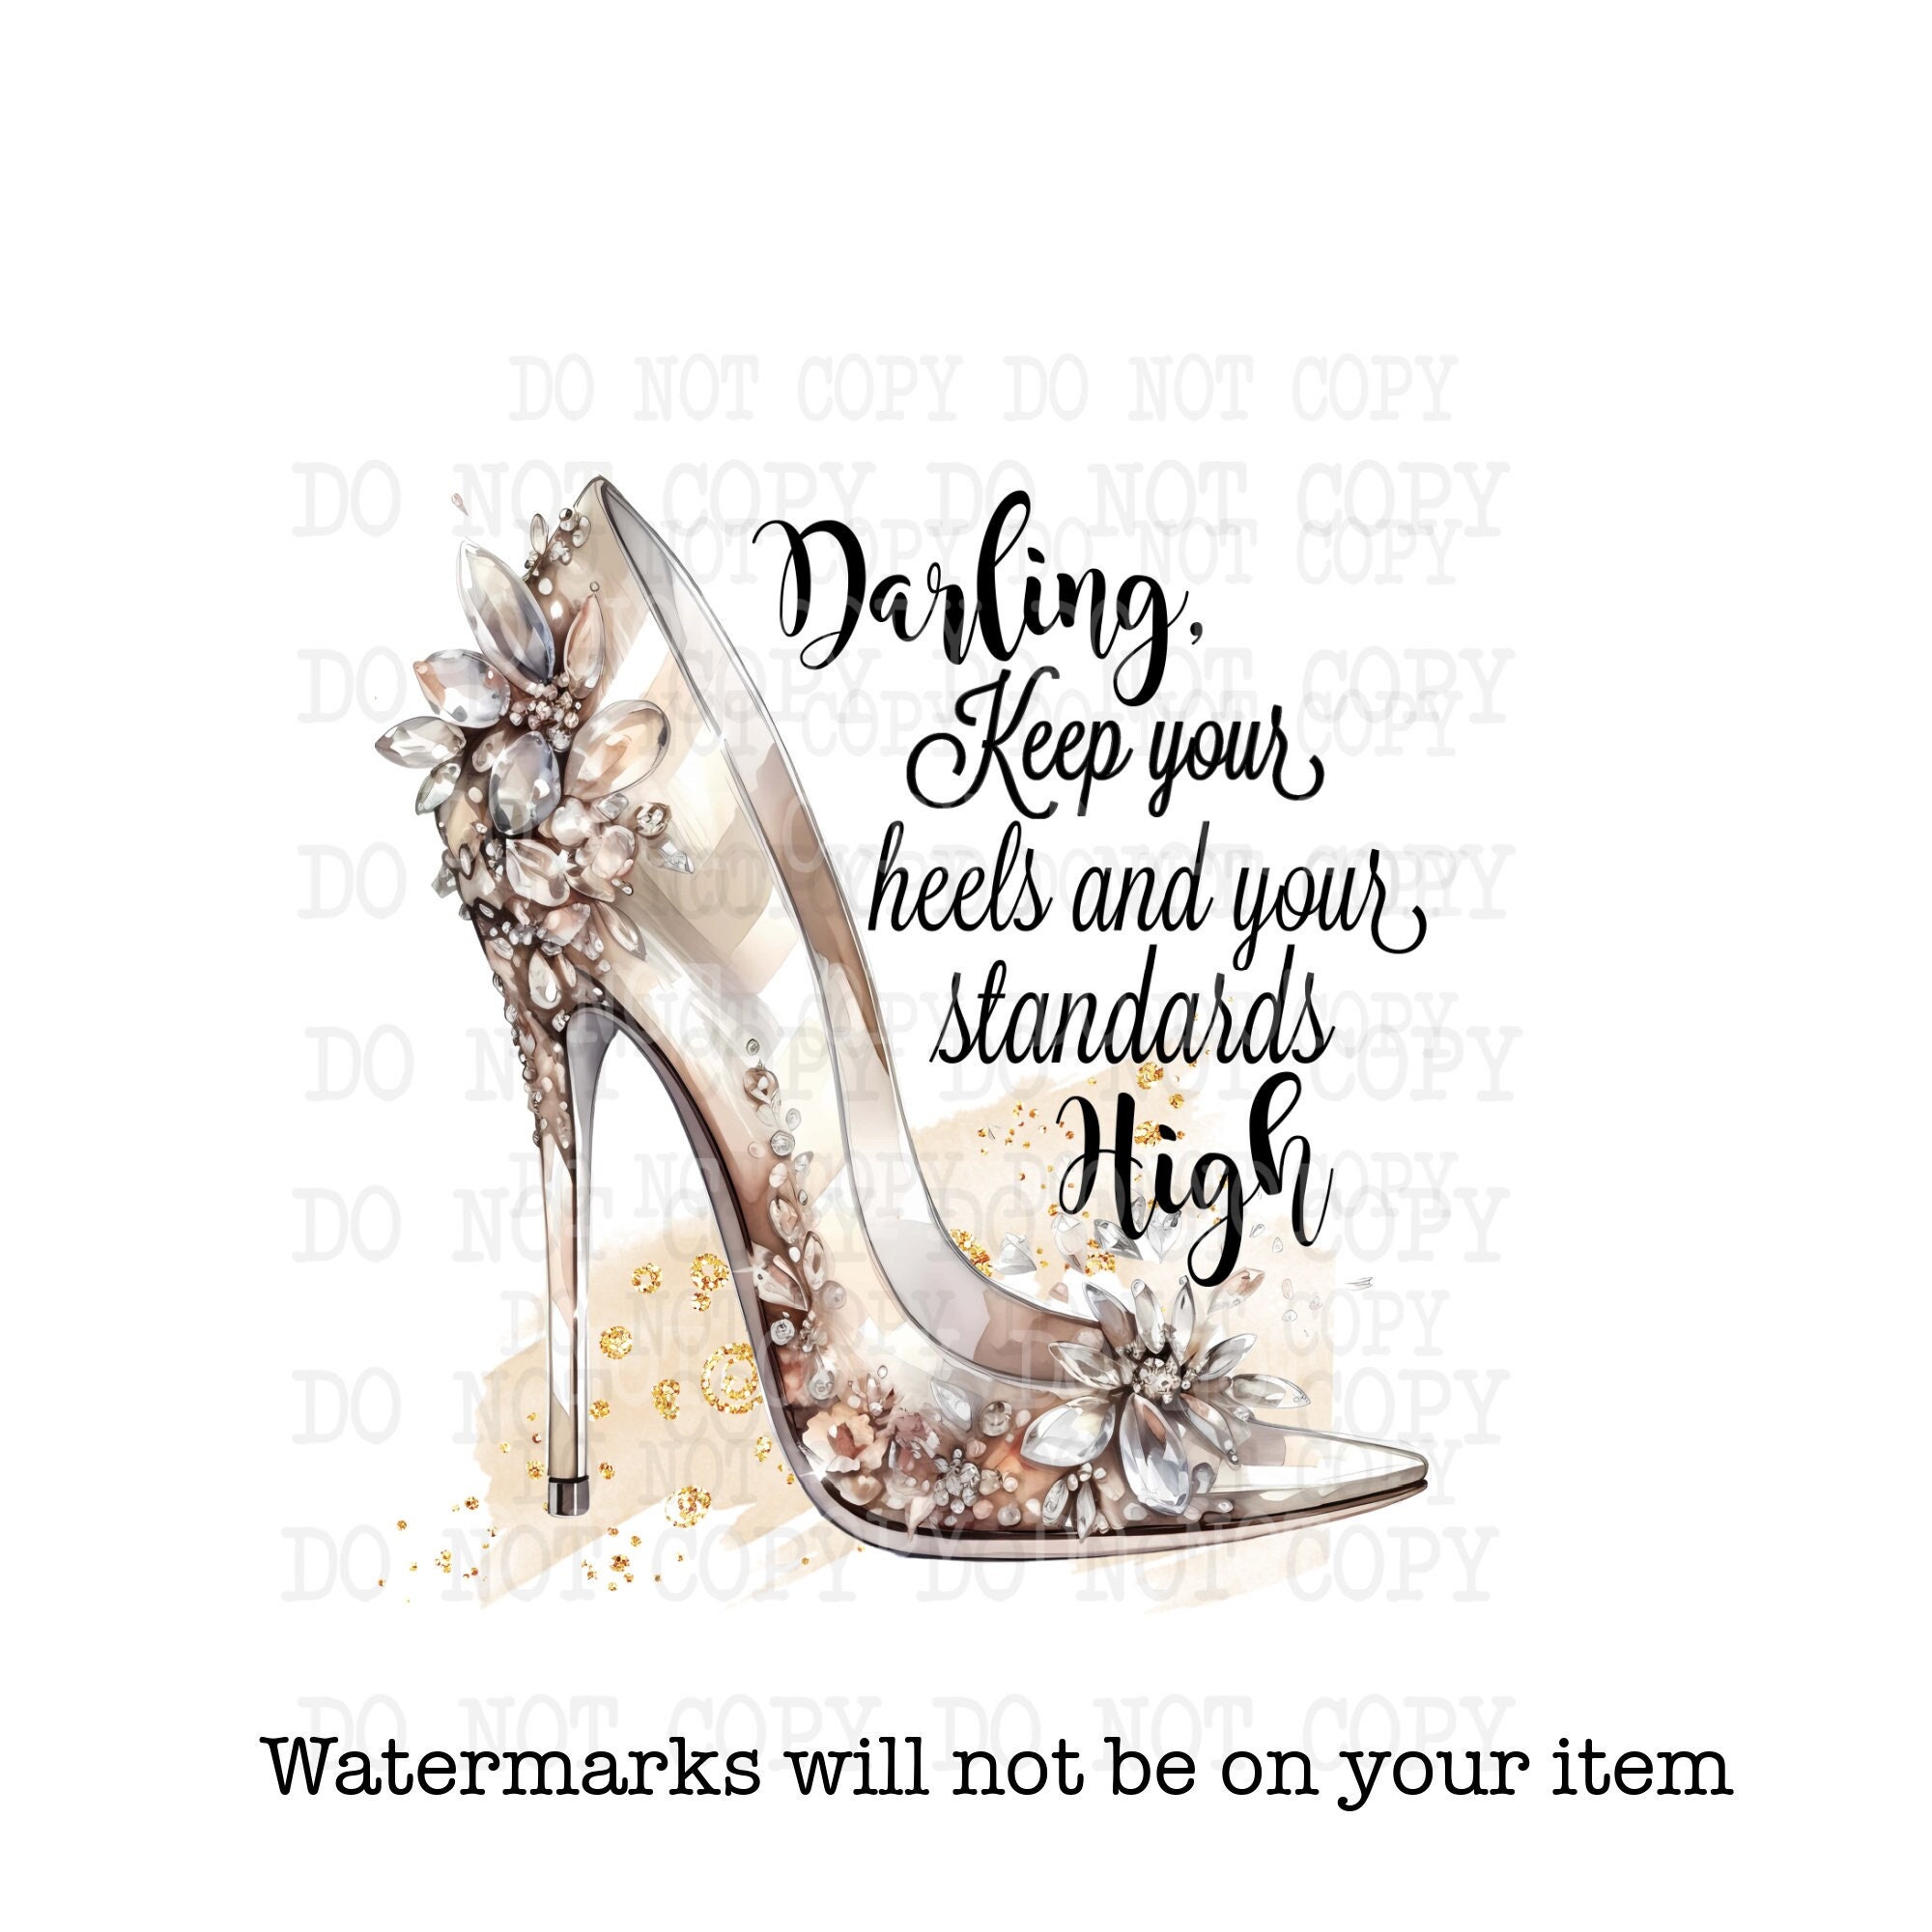 Heels as High as Your Standards - Shoe Wall Decal Vinyl Sticker Quote for  Bedroom